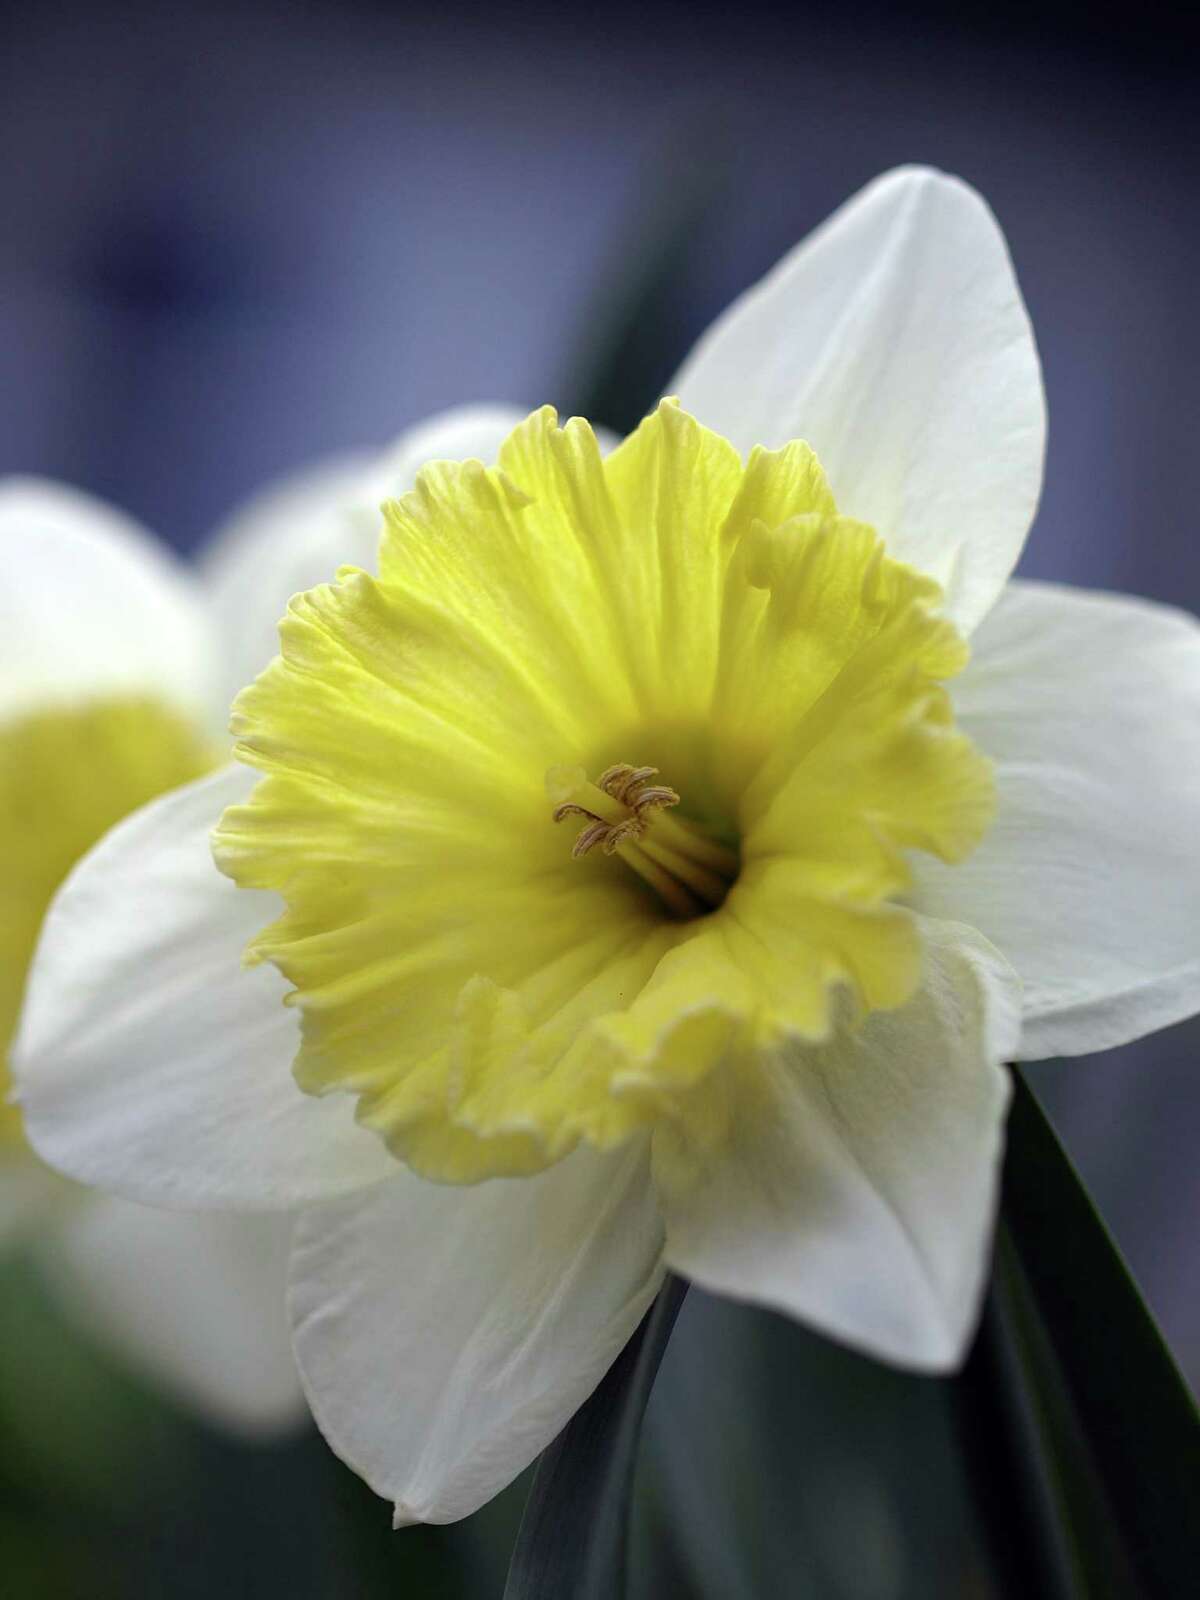 Flowering Narcissus, or what is commonly known as daffodils. Peter Bowden considers them the "Best Of" spring bulb flowers. (Photo by Peter D. Bowden)